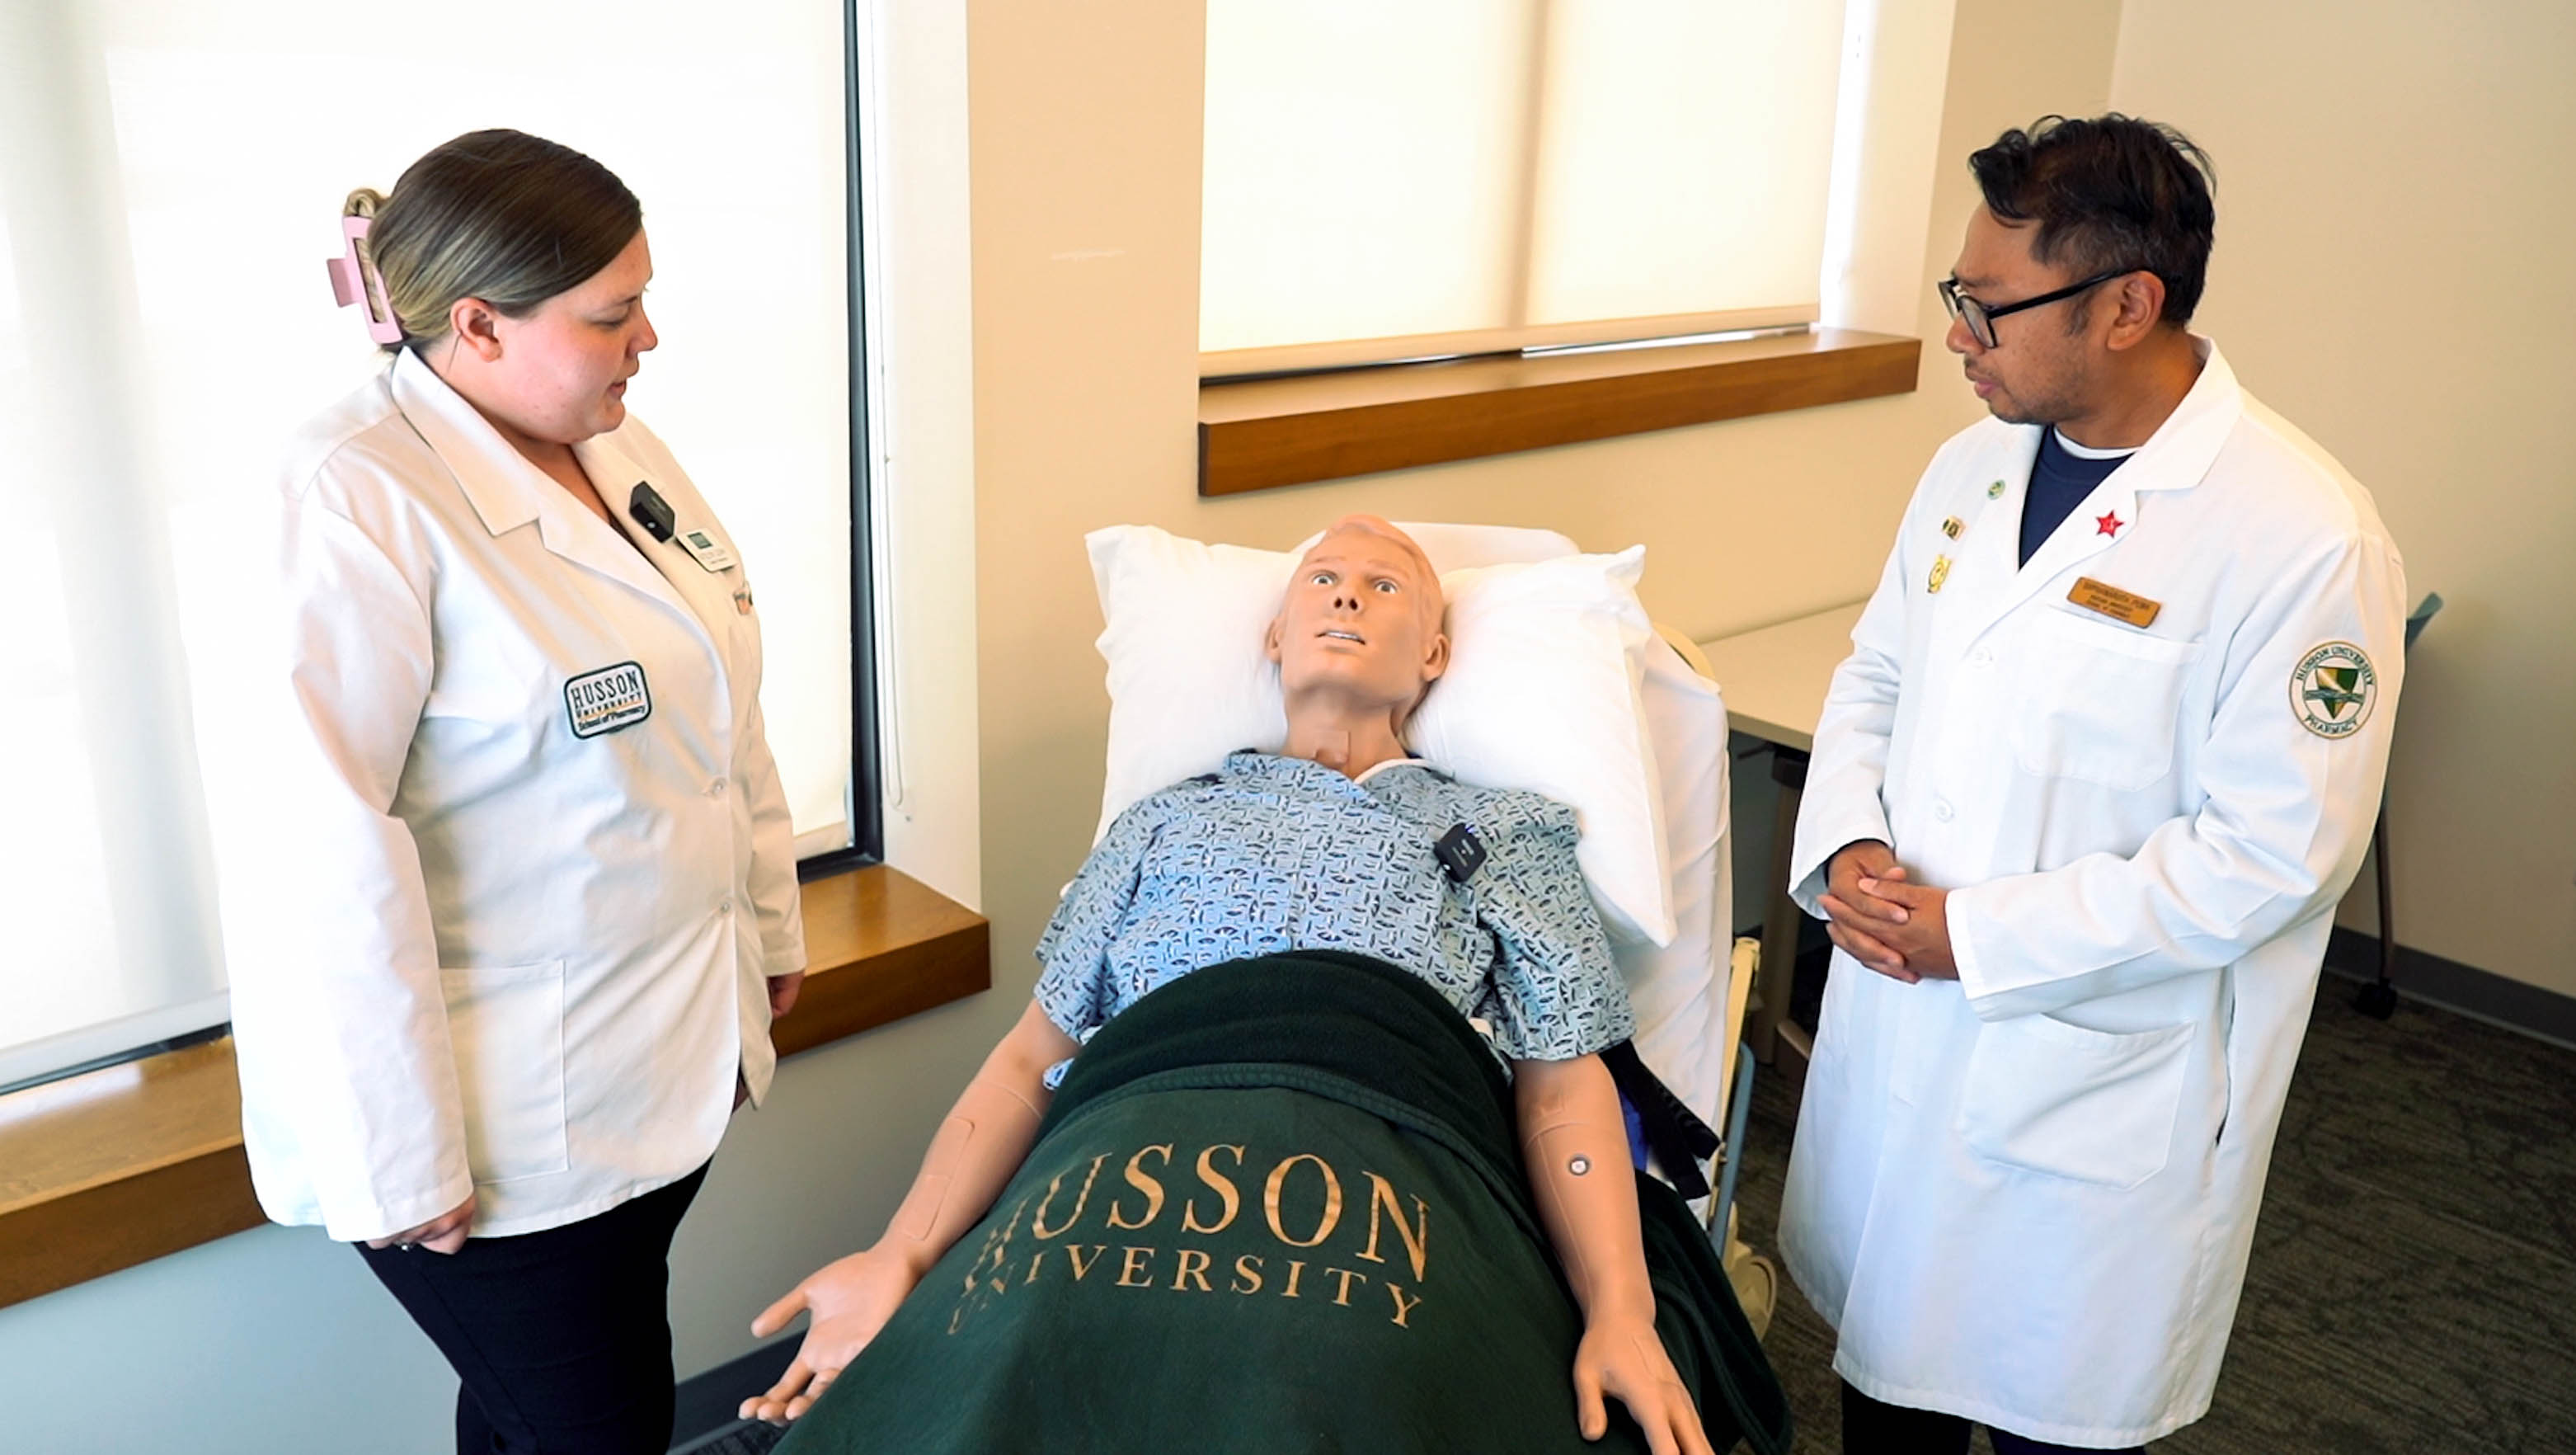 The HAL S5301 interdisciplinary patient simulator manikin is shown wearing a hospital gown on a hospital bed. Two students stand beside the bed on other time.